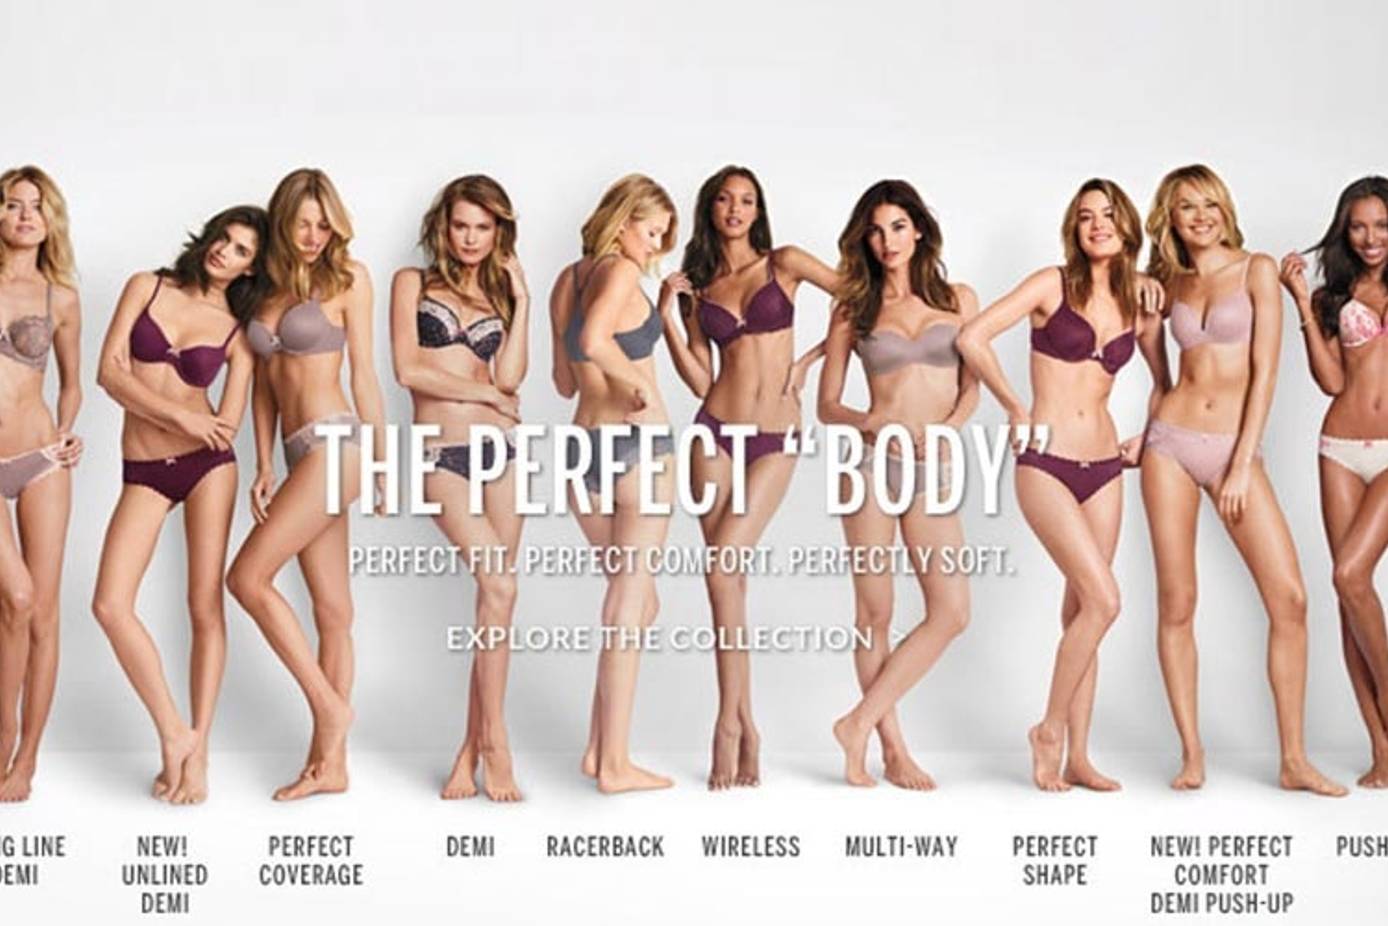 Readers of various shapes recreate Victoria's Secret ads and prove